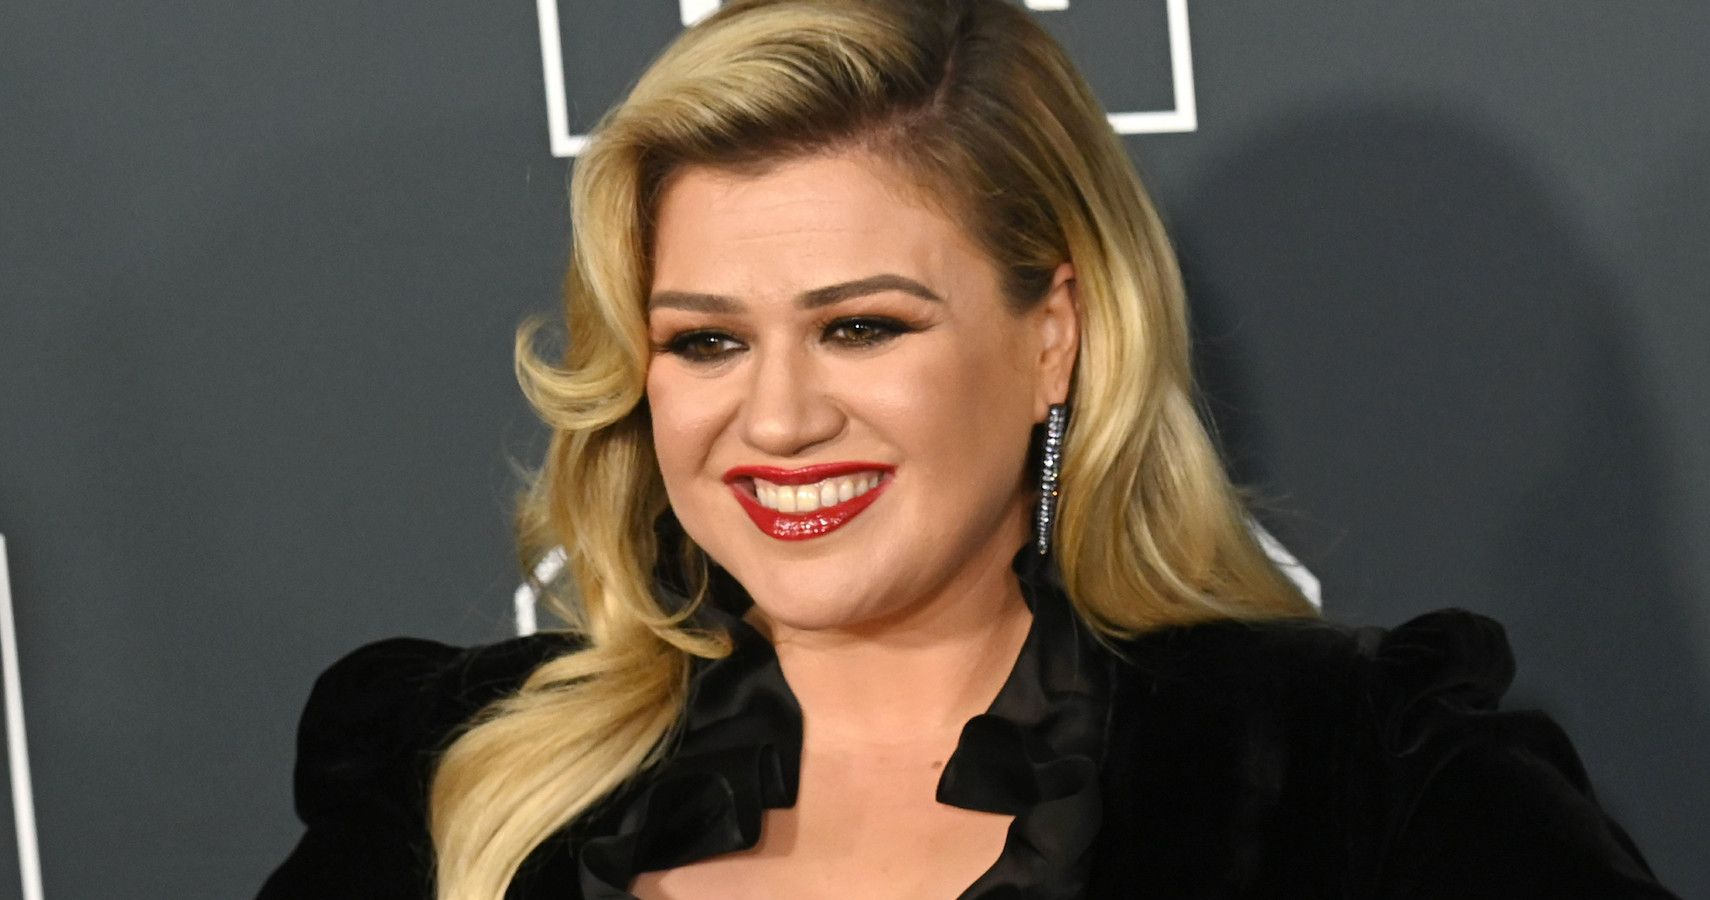 Kelly Clarkson on the red carpet 